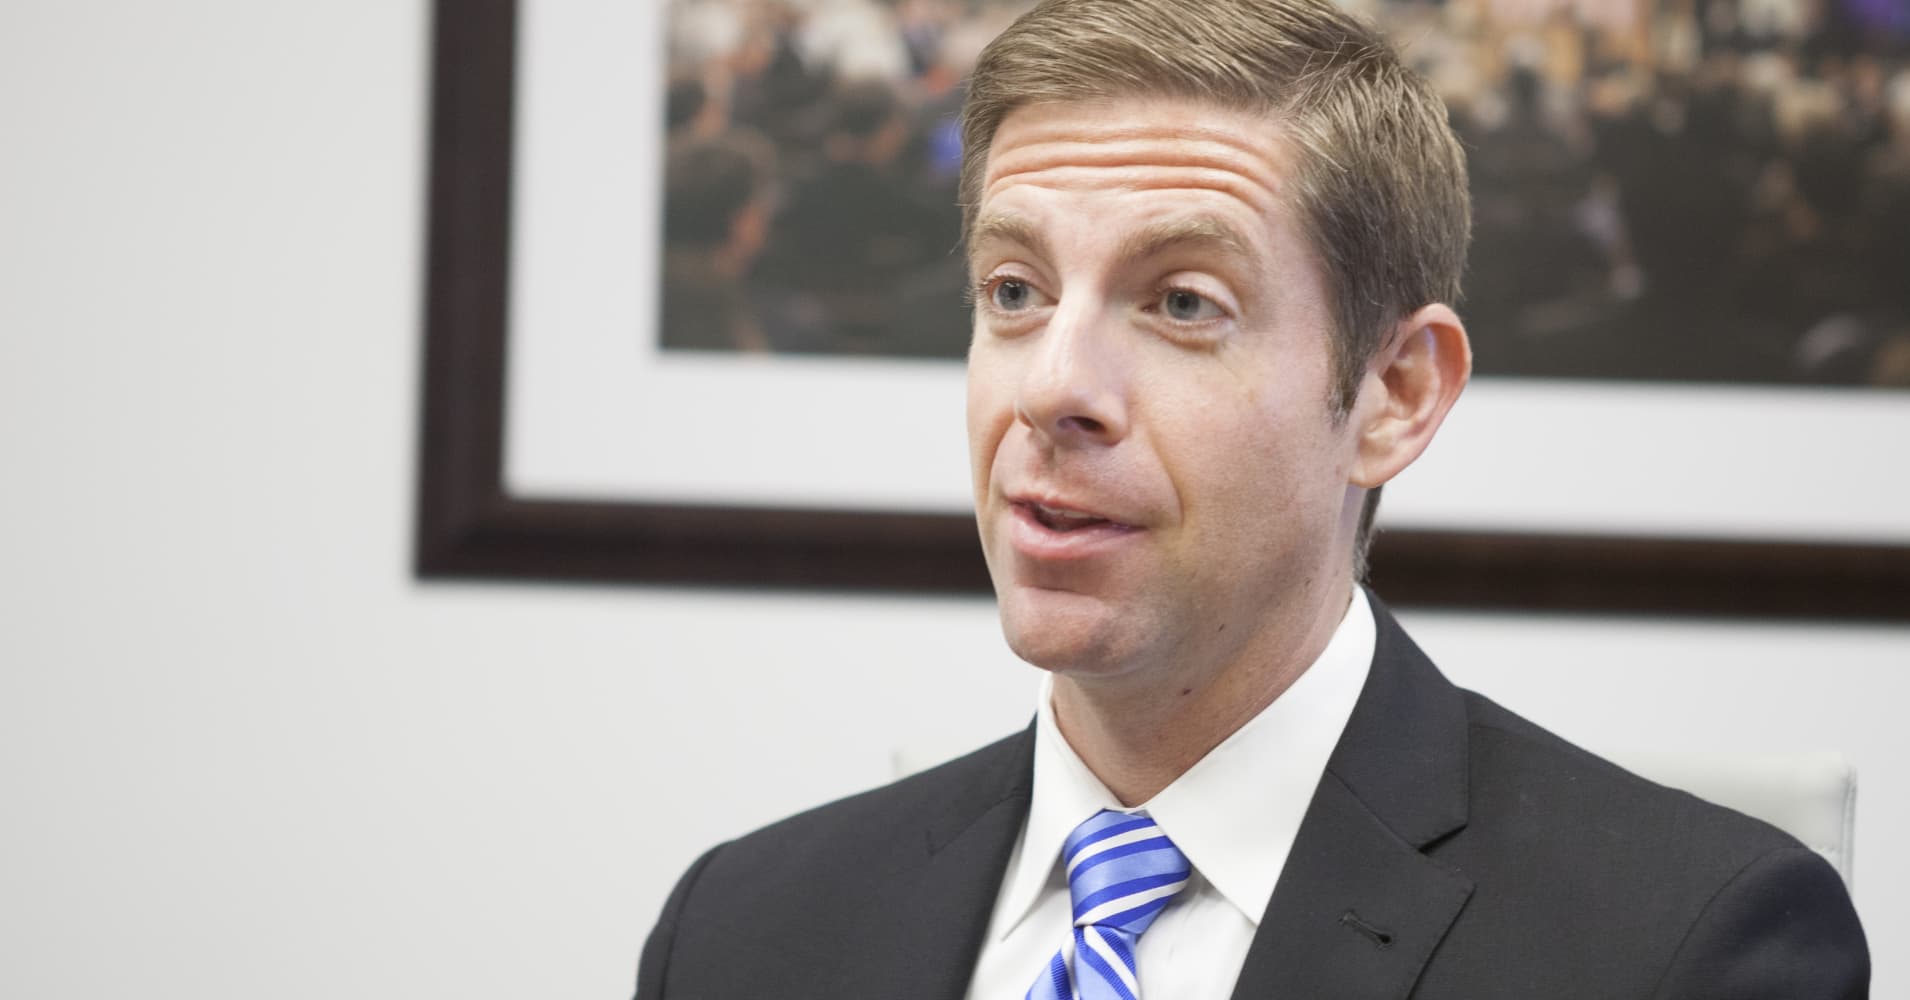 Democrat Mike Levin is apparent winner of California House seat vacated